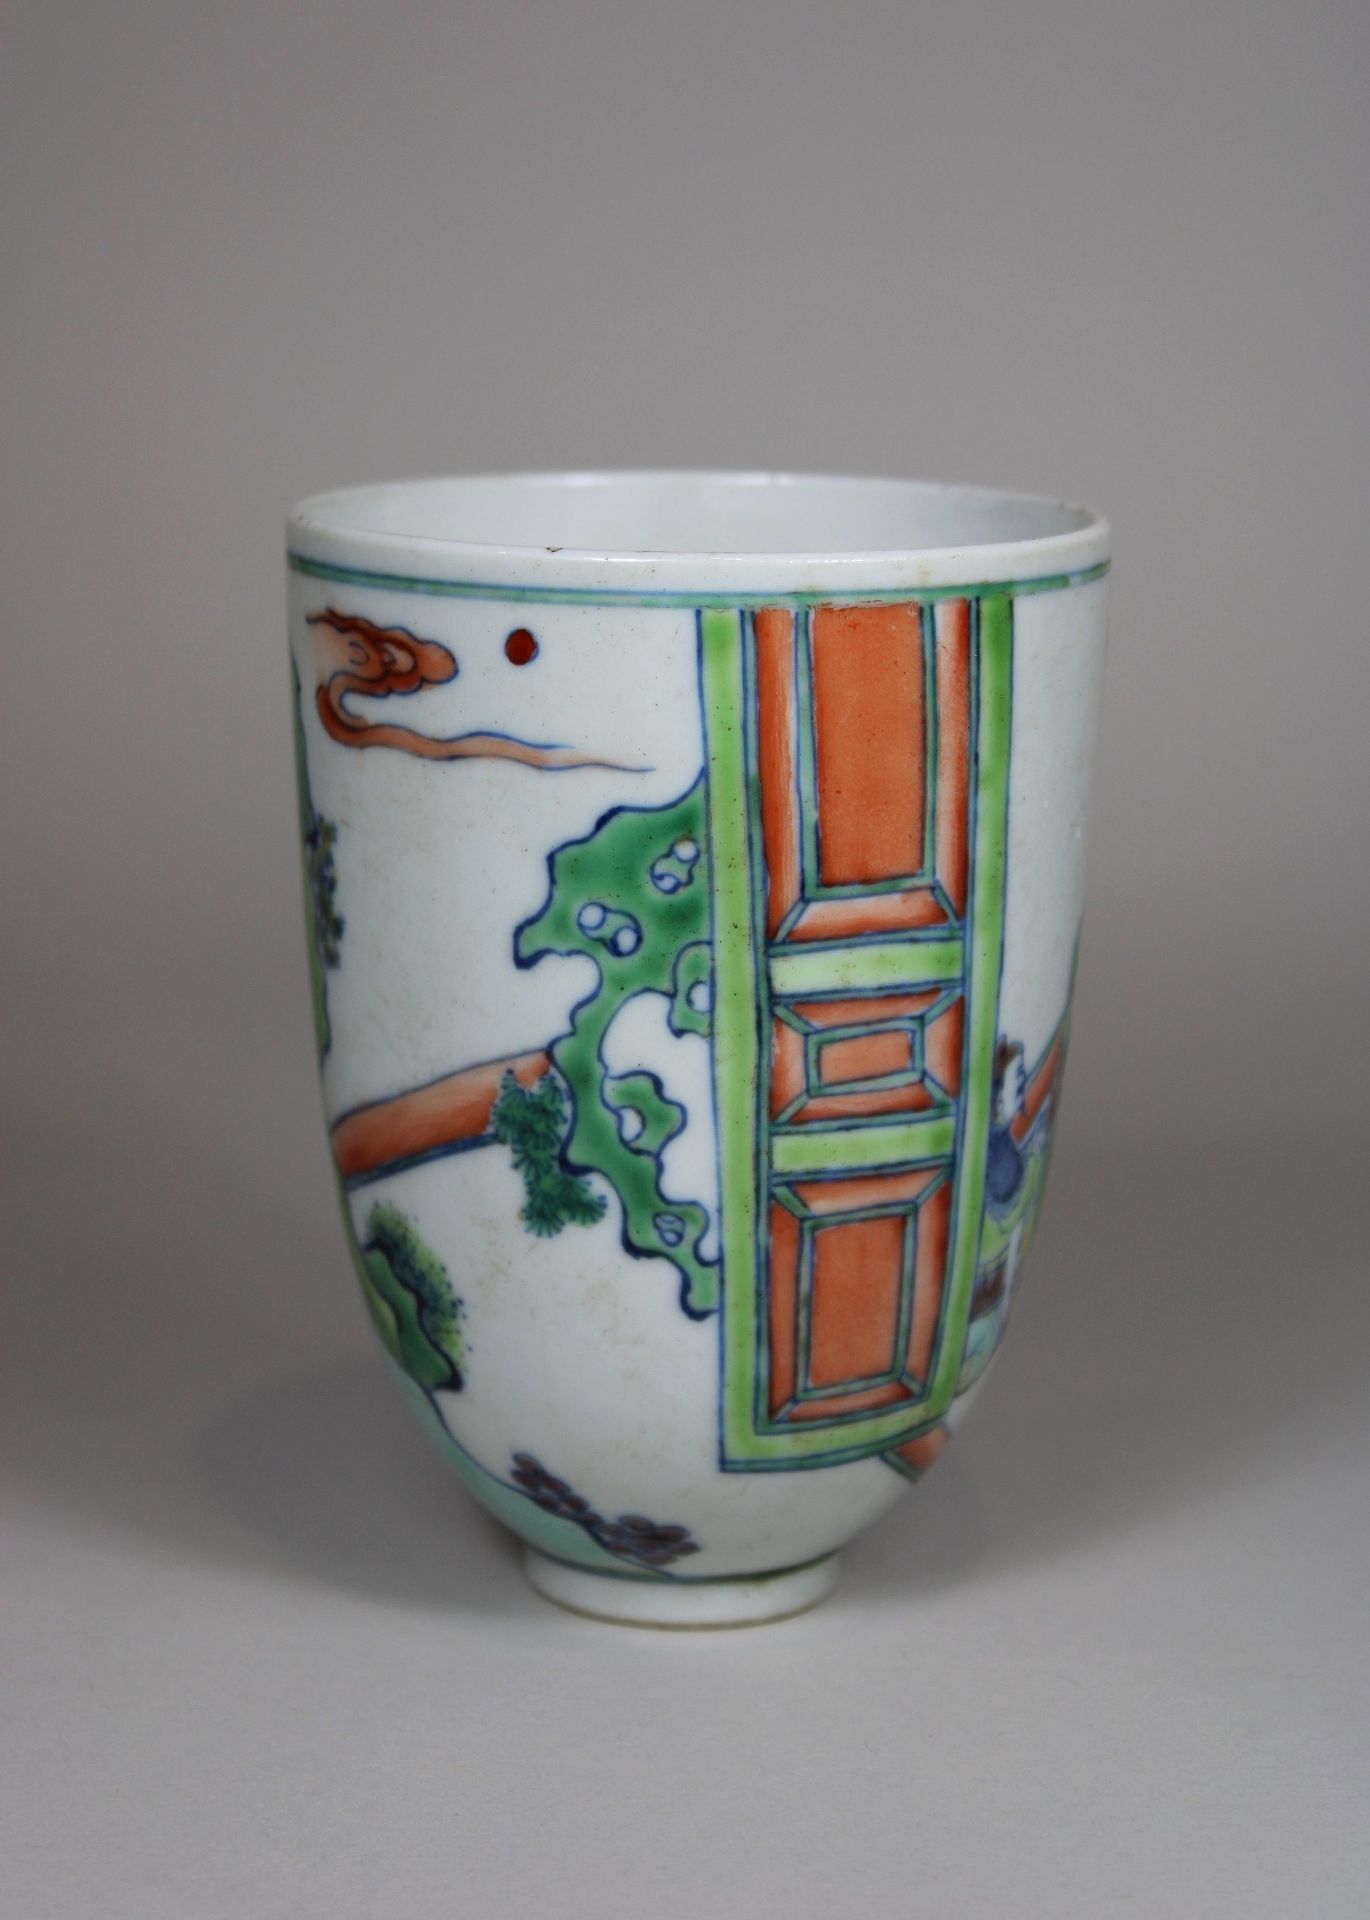 Teacup, China, Ming Dynastie - Image 2 of 5